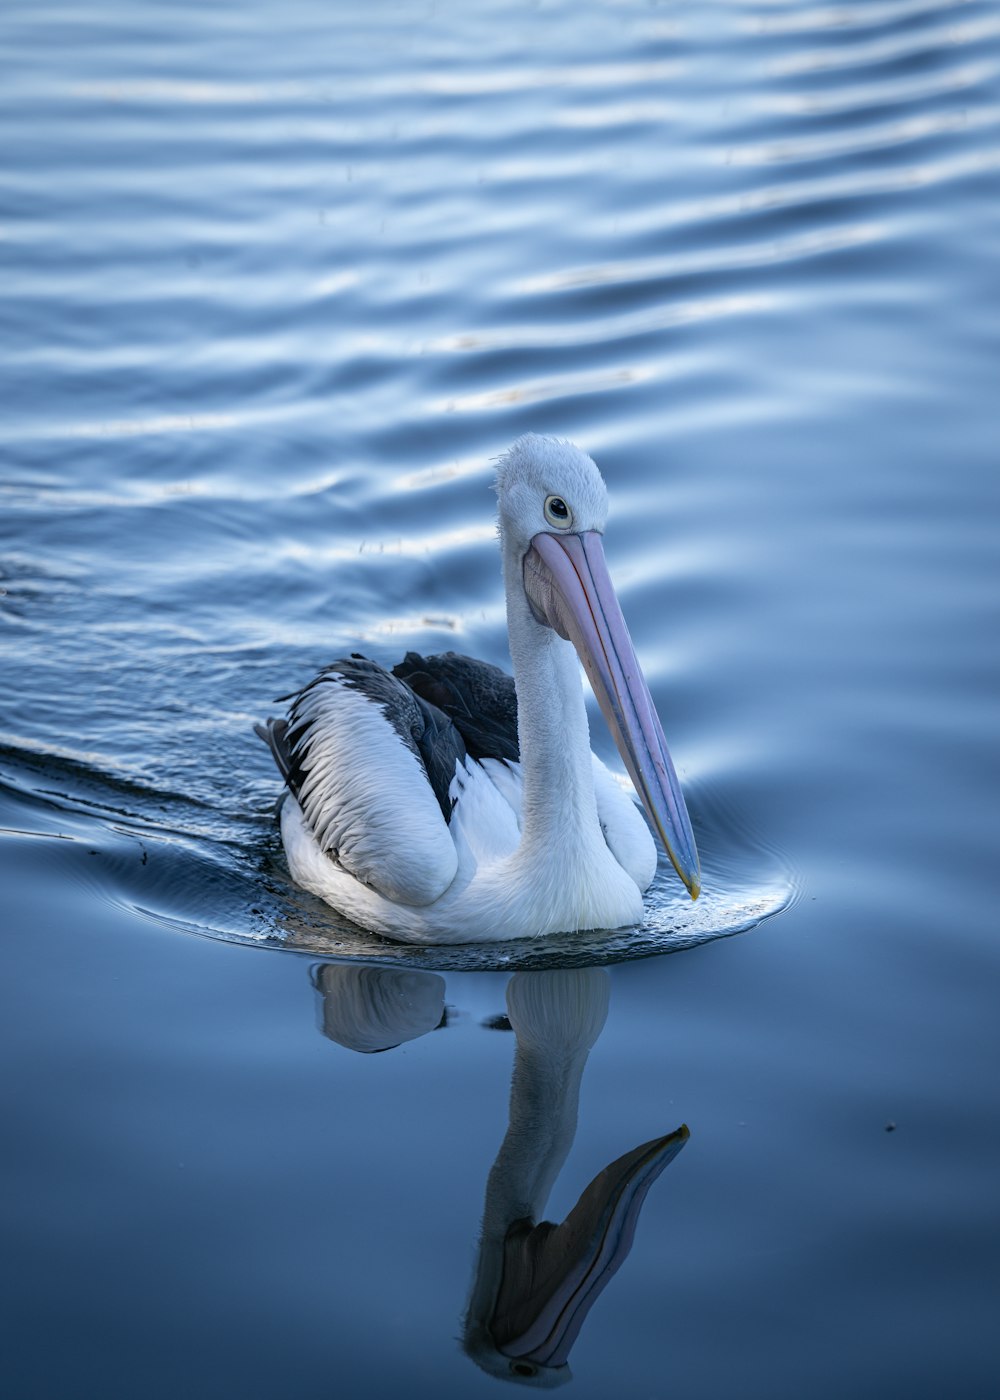 a pelican is swimming in a body of water